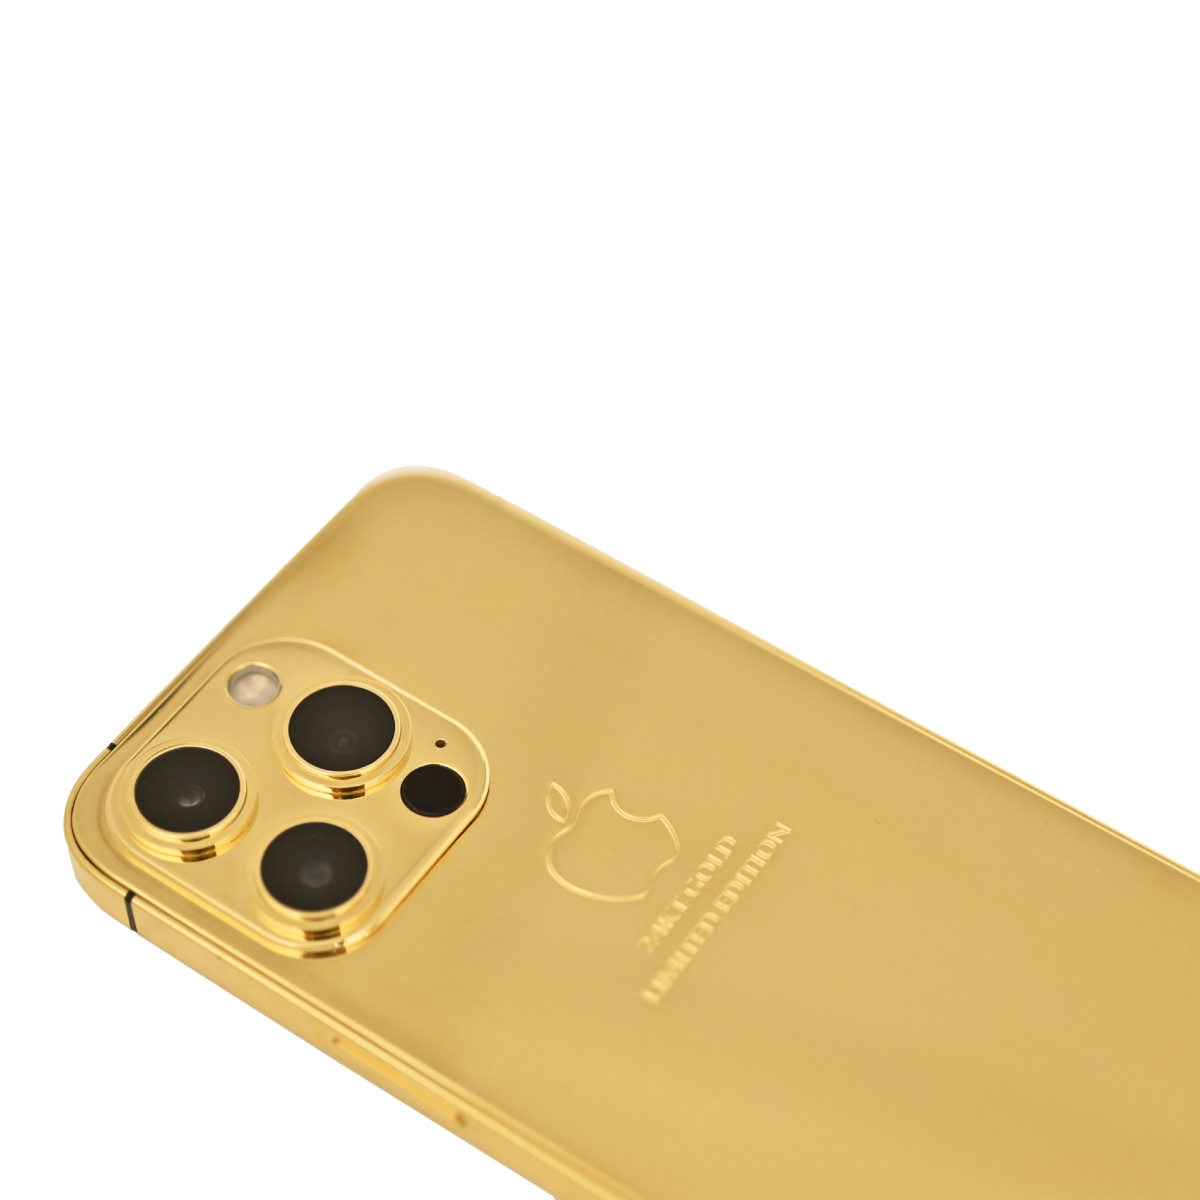 Caviar Luxury Customized 24k Full Gold Plated Iphone 14 Pro 128 Gb Limited Edition